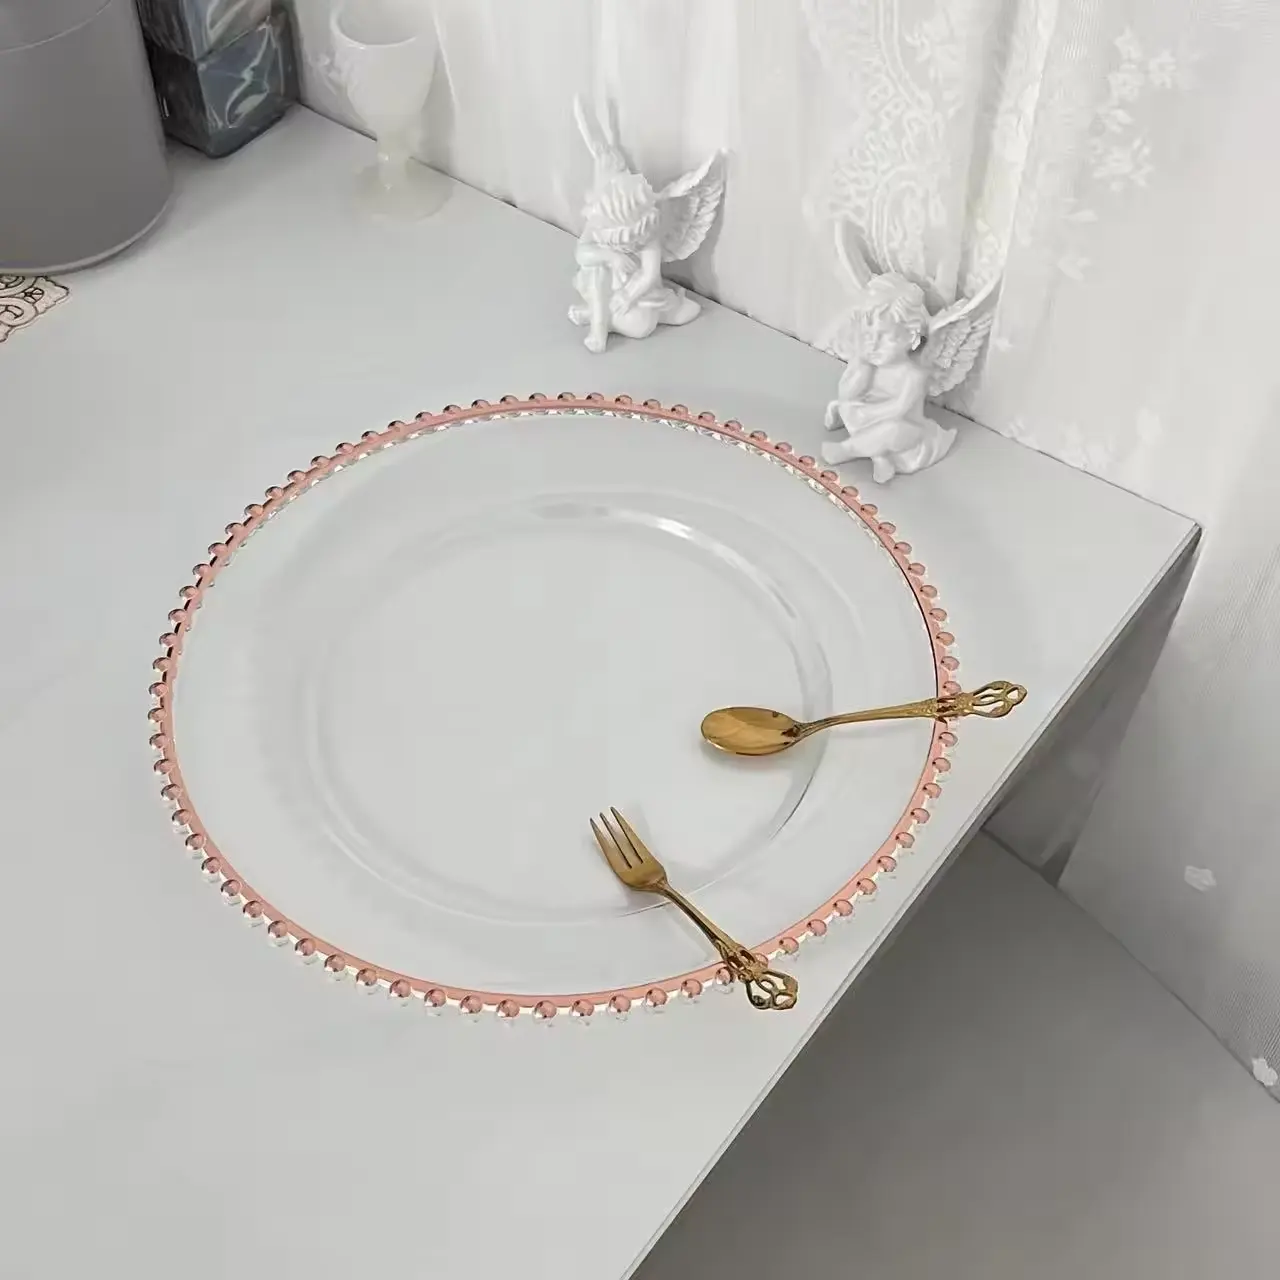 Hot sell Wholesale 13 Inch Dinner Under Plate Clear Plastic Silver Table Elegant Beaded Rose Gold Rim Charger Plates for Wedding